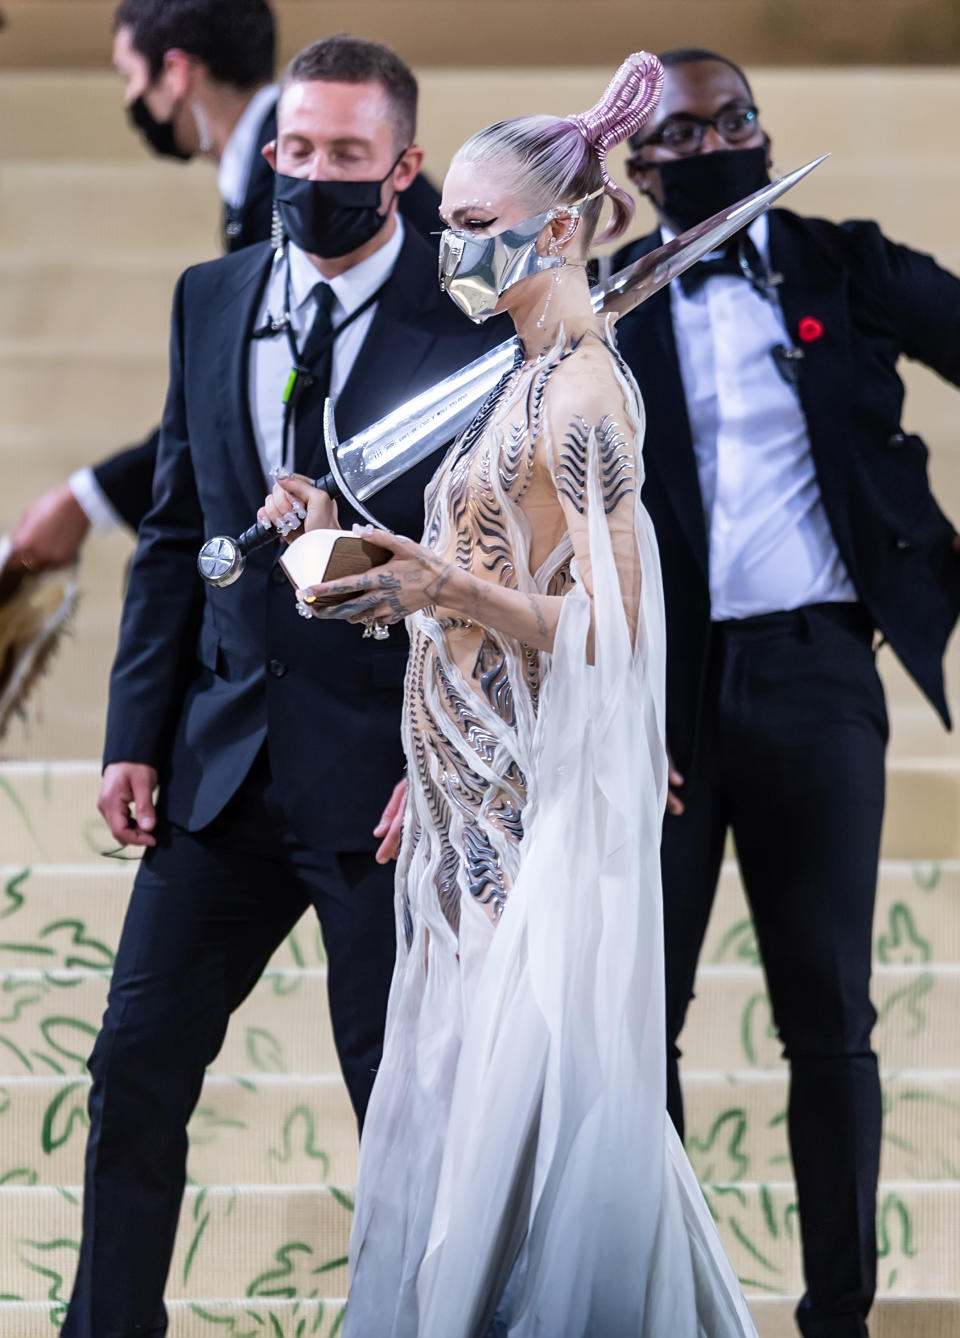 Grimes in a futuristic, sculptural white gown with metallic accents, at a formal event, with masked attendees in the background